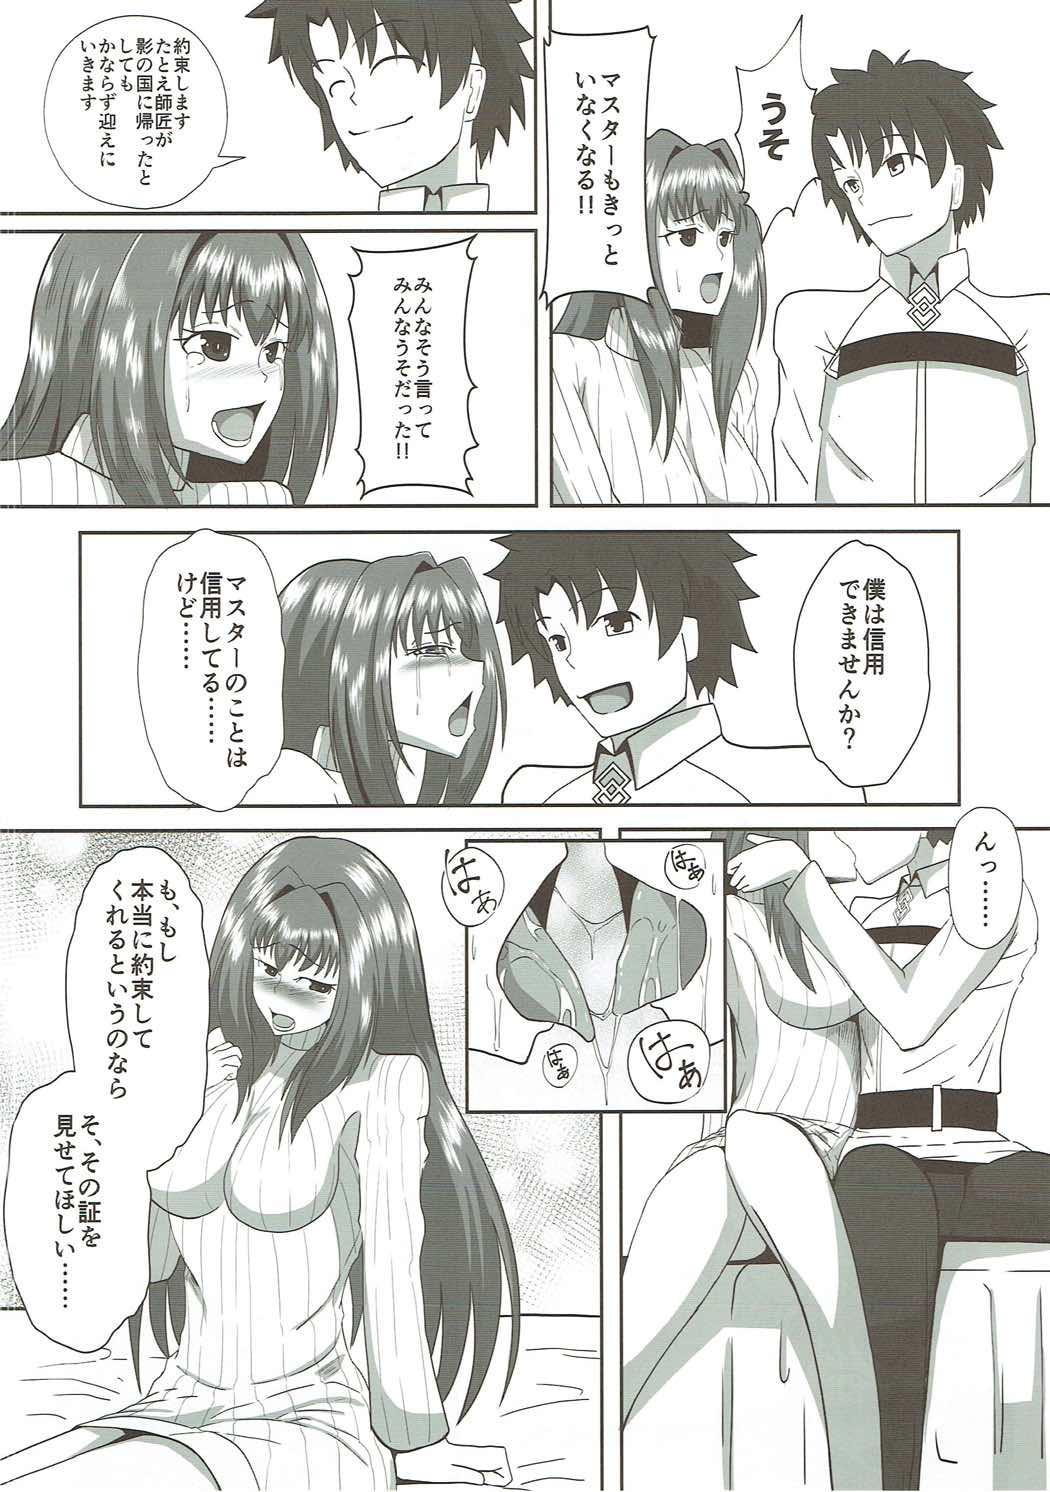 Perfect Ass Scathach Alternative - Fate grand order Hot Naked Women - Page 7